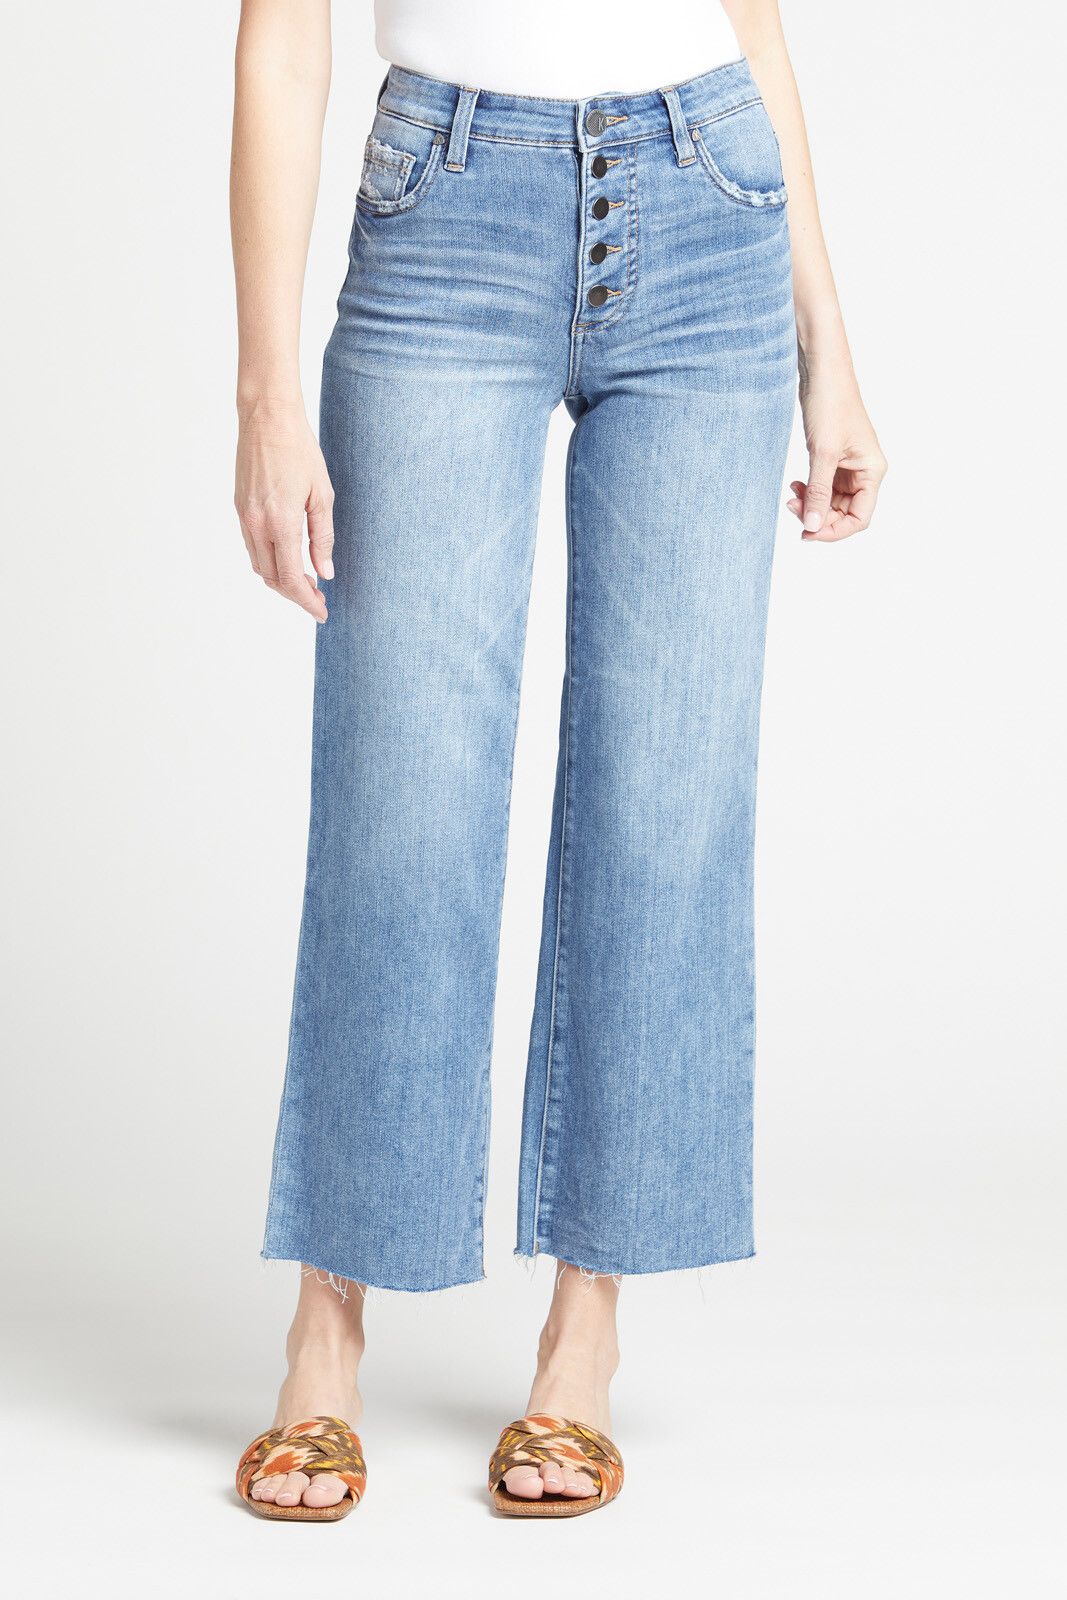 KUT FROM THE KLOTH Charlotte High Rise Wide Leg Jean | EVEREVE | Evereve